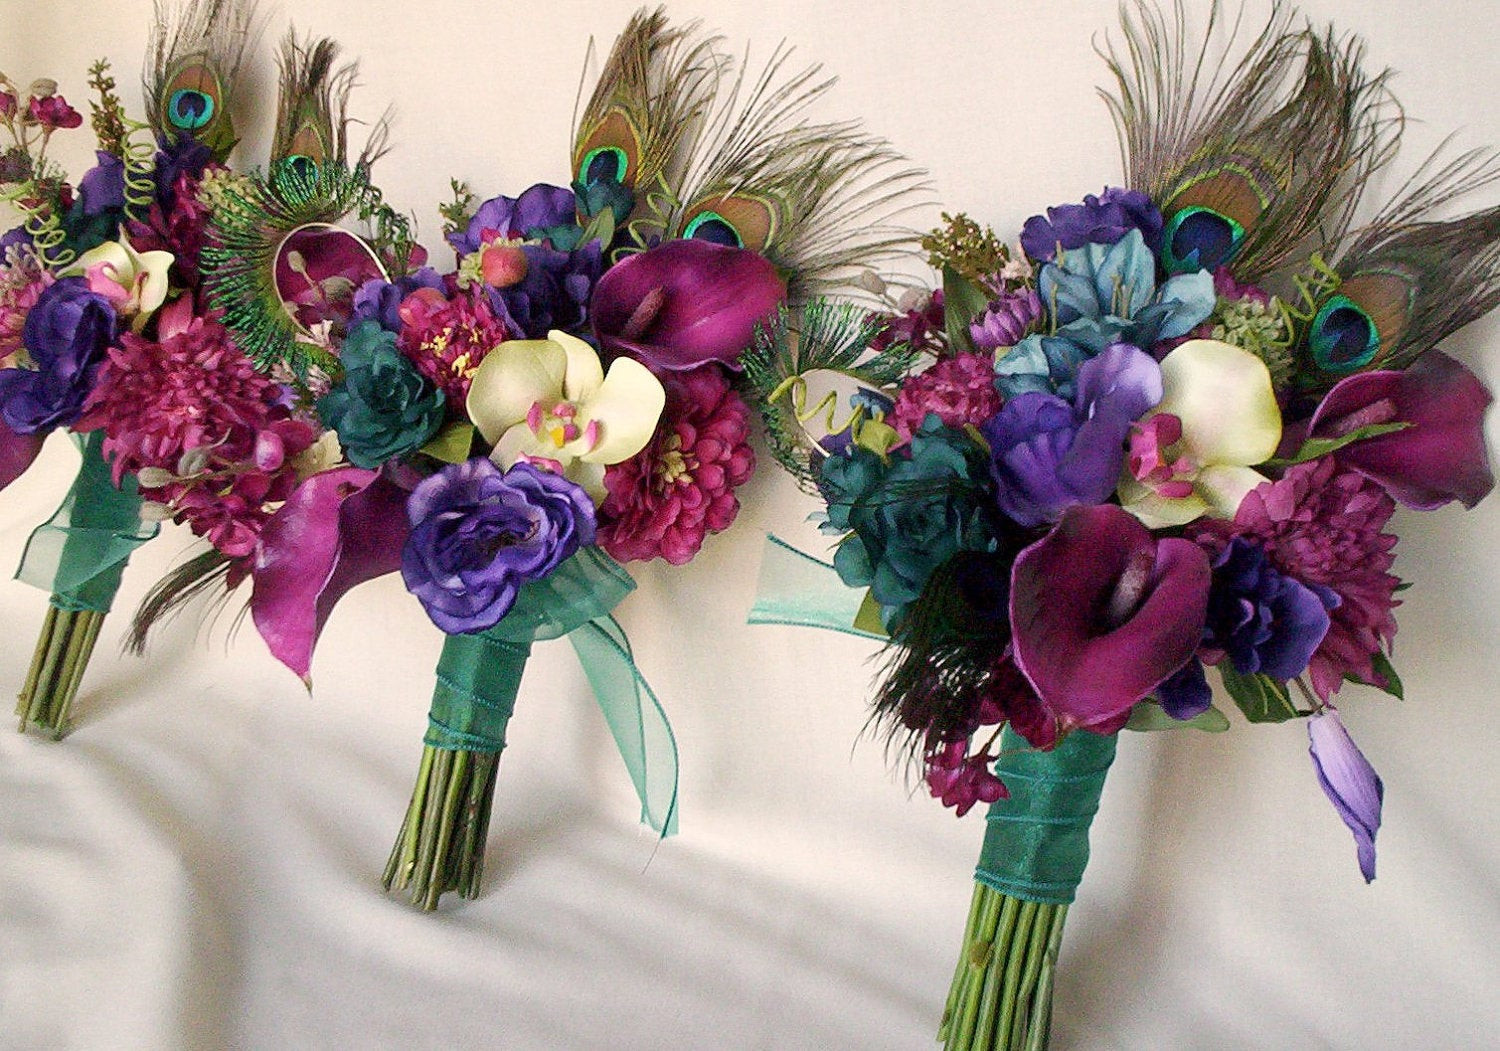 Peacock Wedding Flowers
 Teal Peacock feather Bridal Bouquet Brides maids artificial